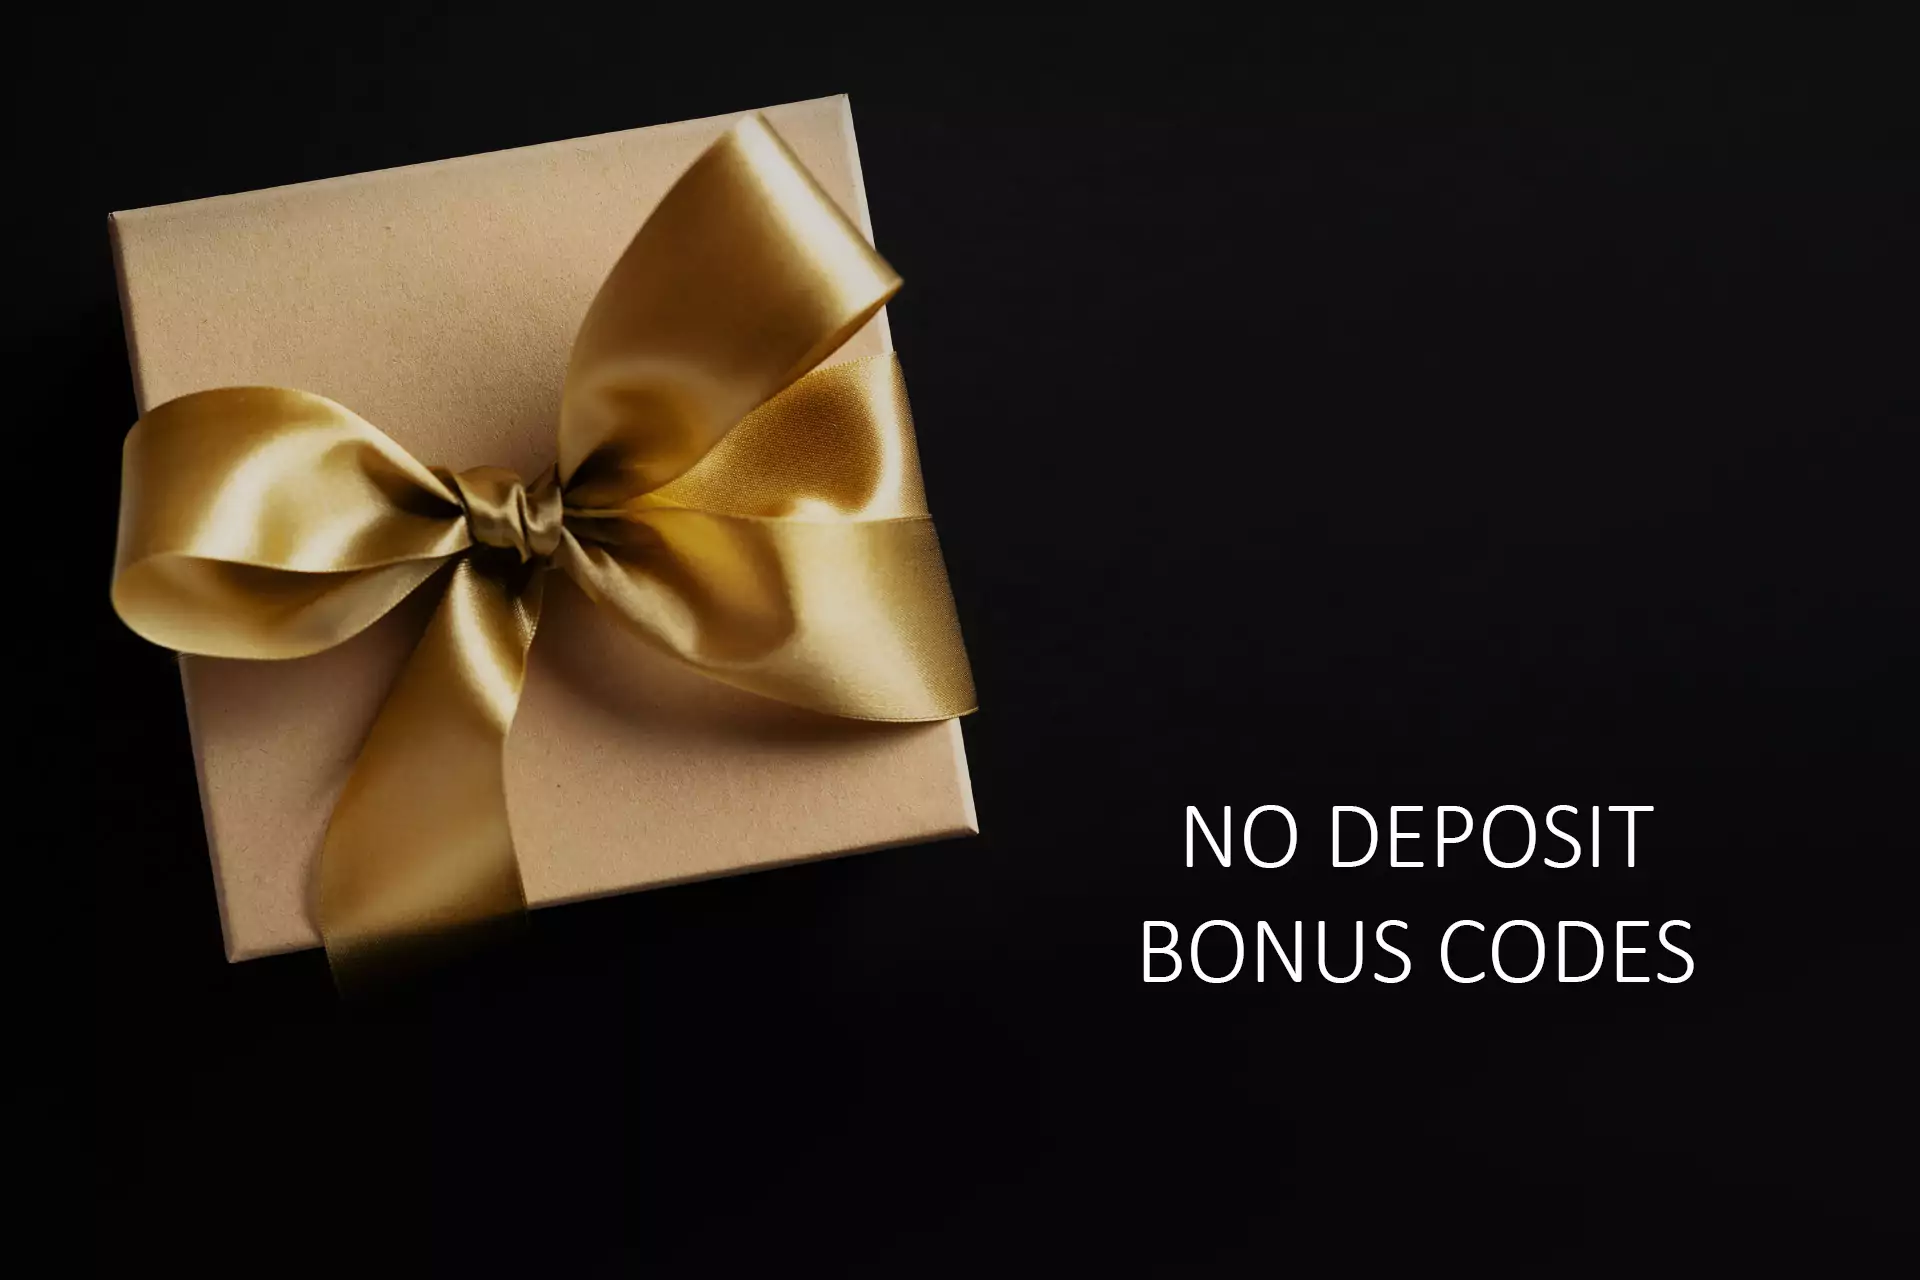 A no deposit bonus is usually more preferable among users of betting sites.